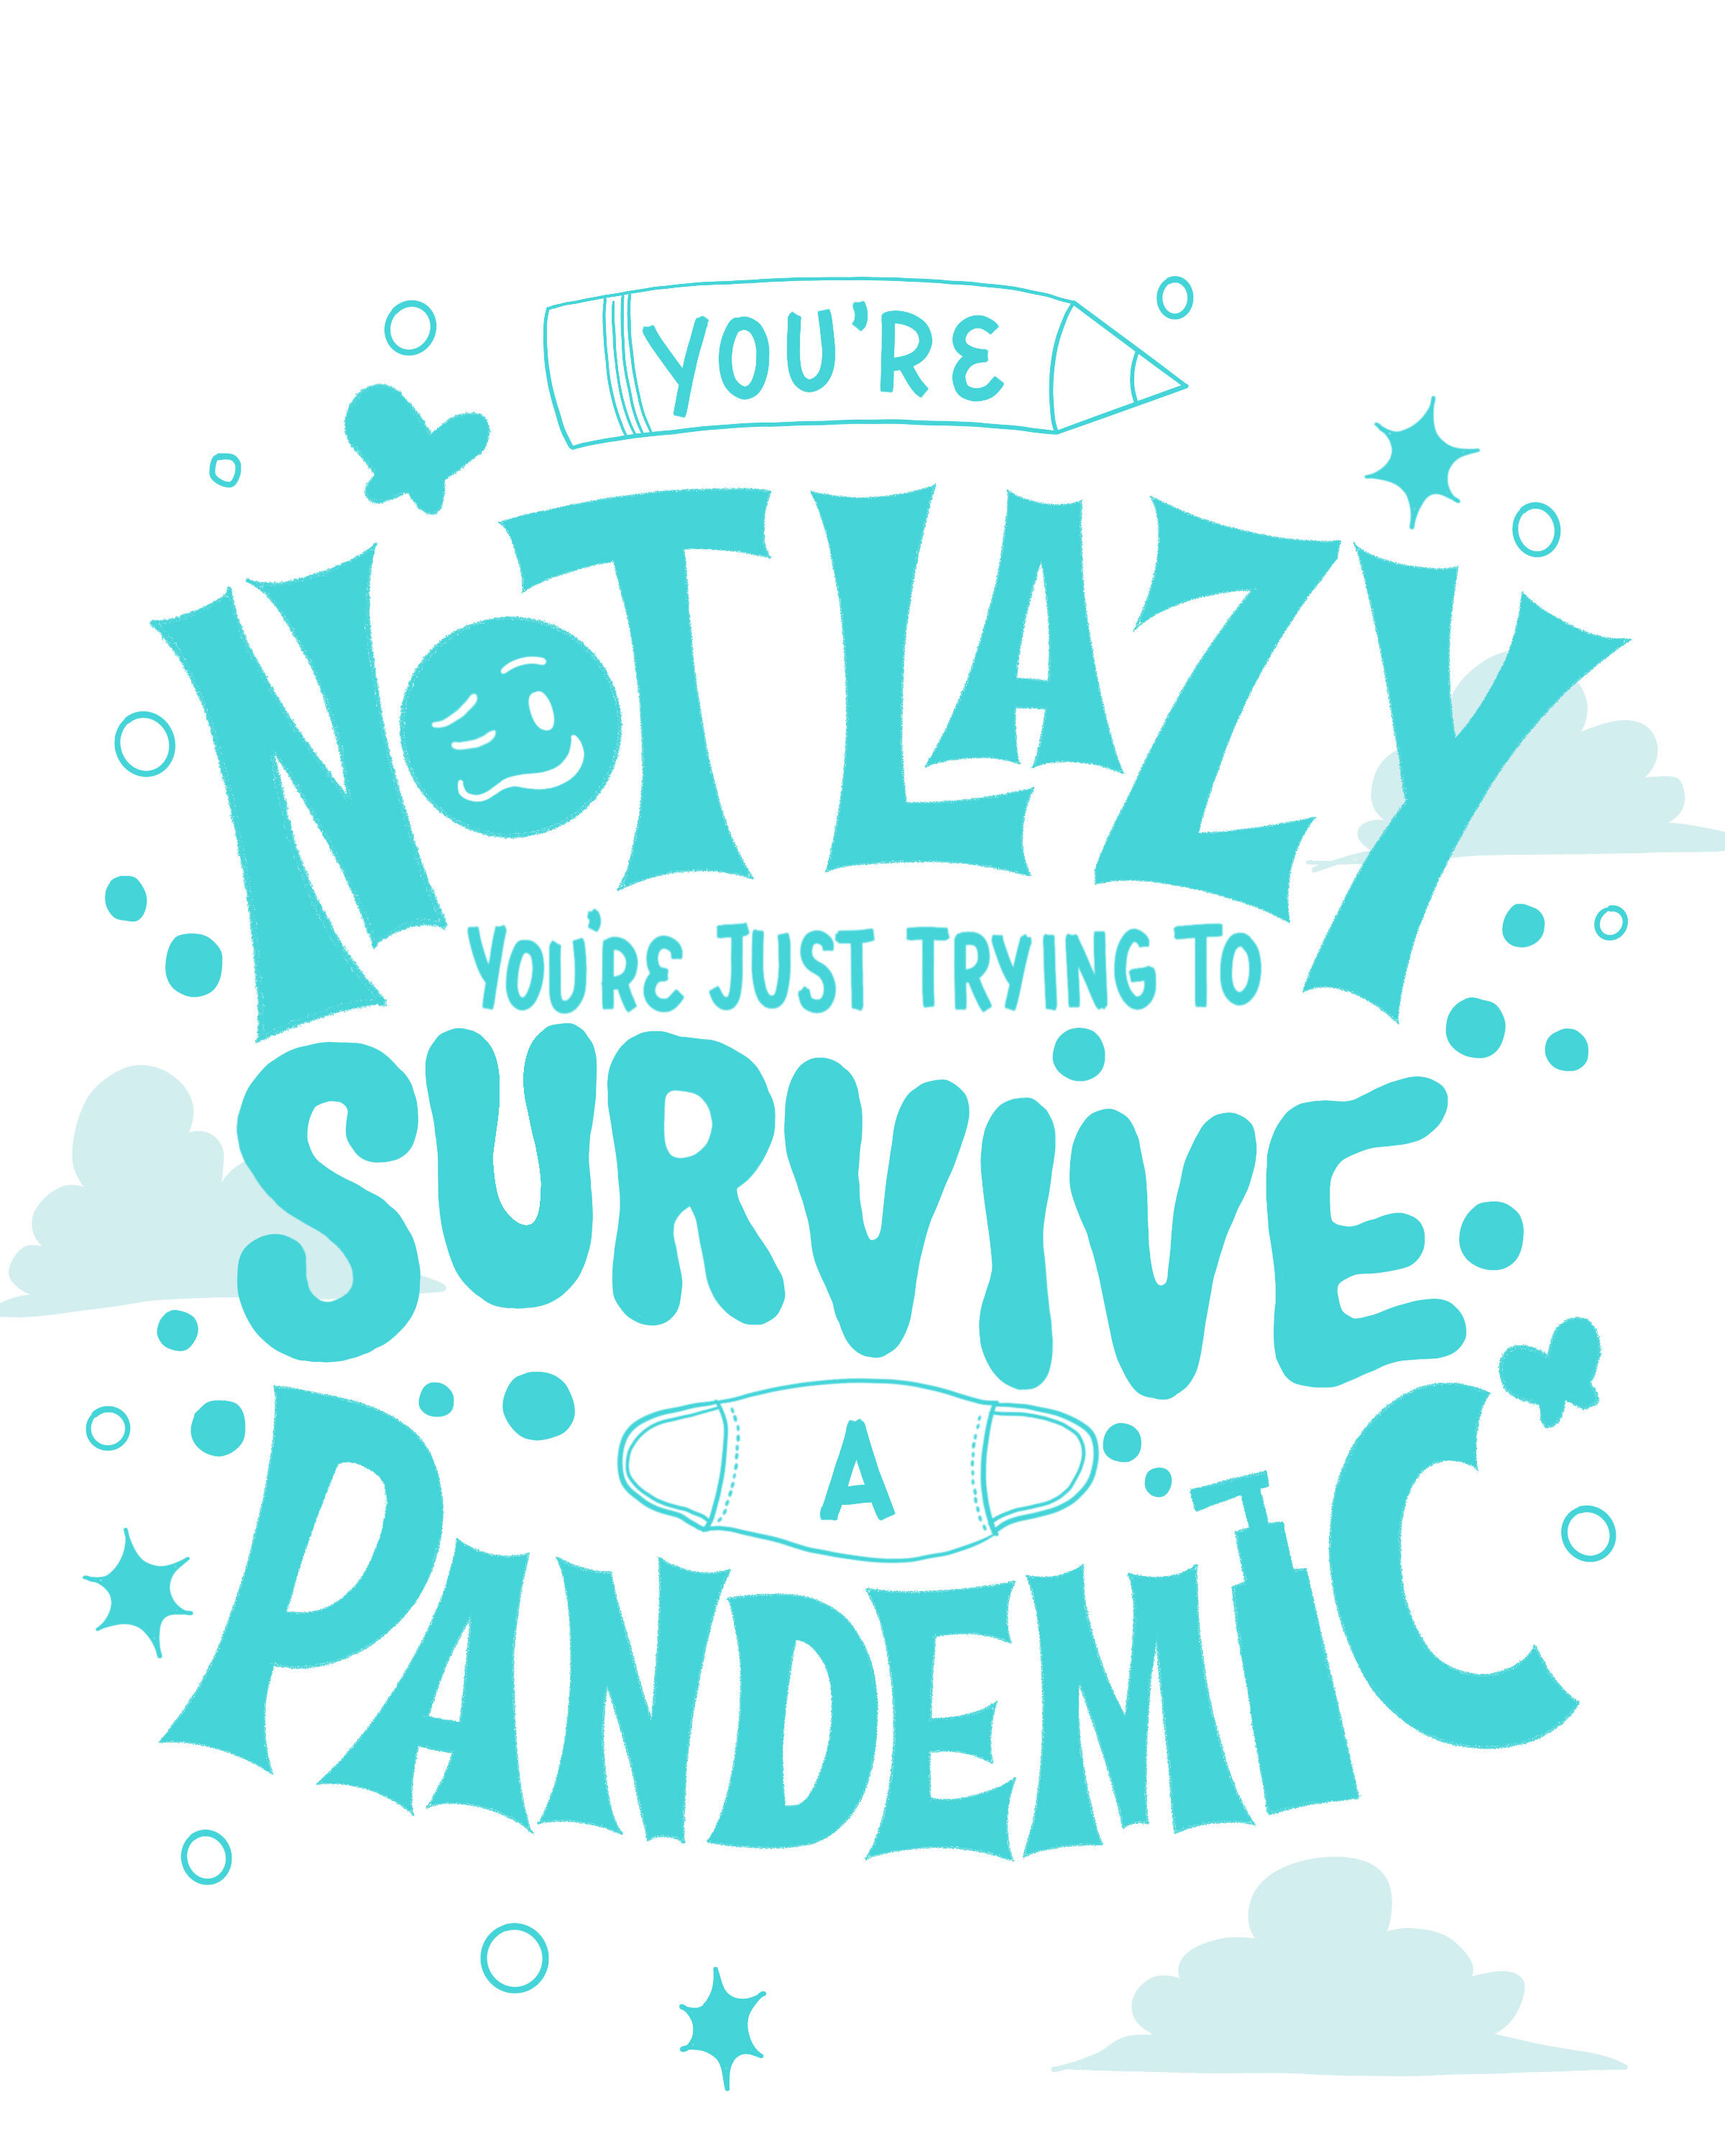 You're_Not_Lazy-4-pandemic-positive-quote-solid-colors.jpg